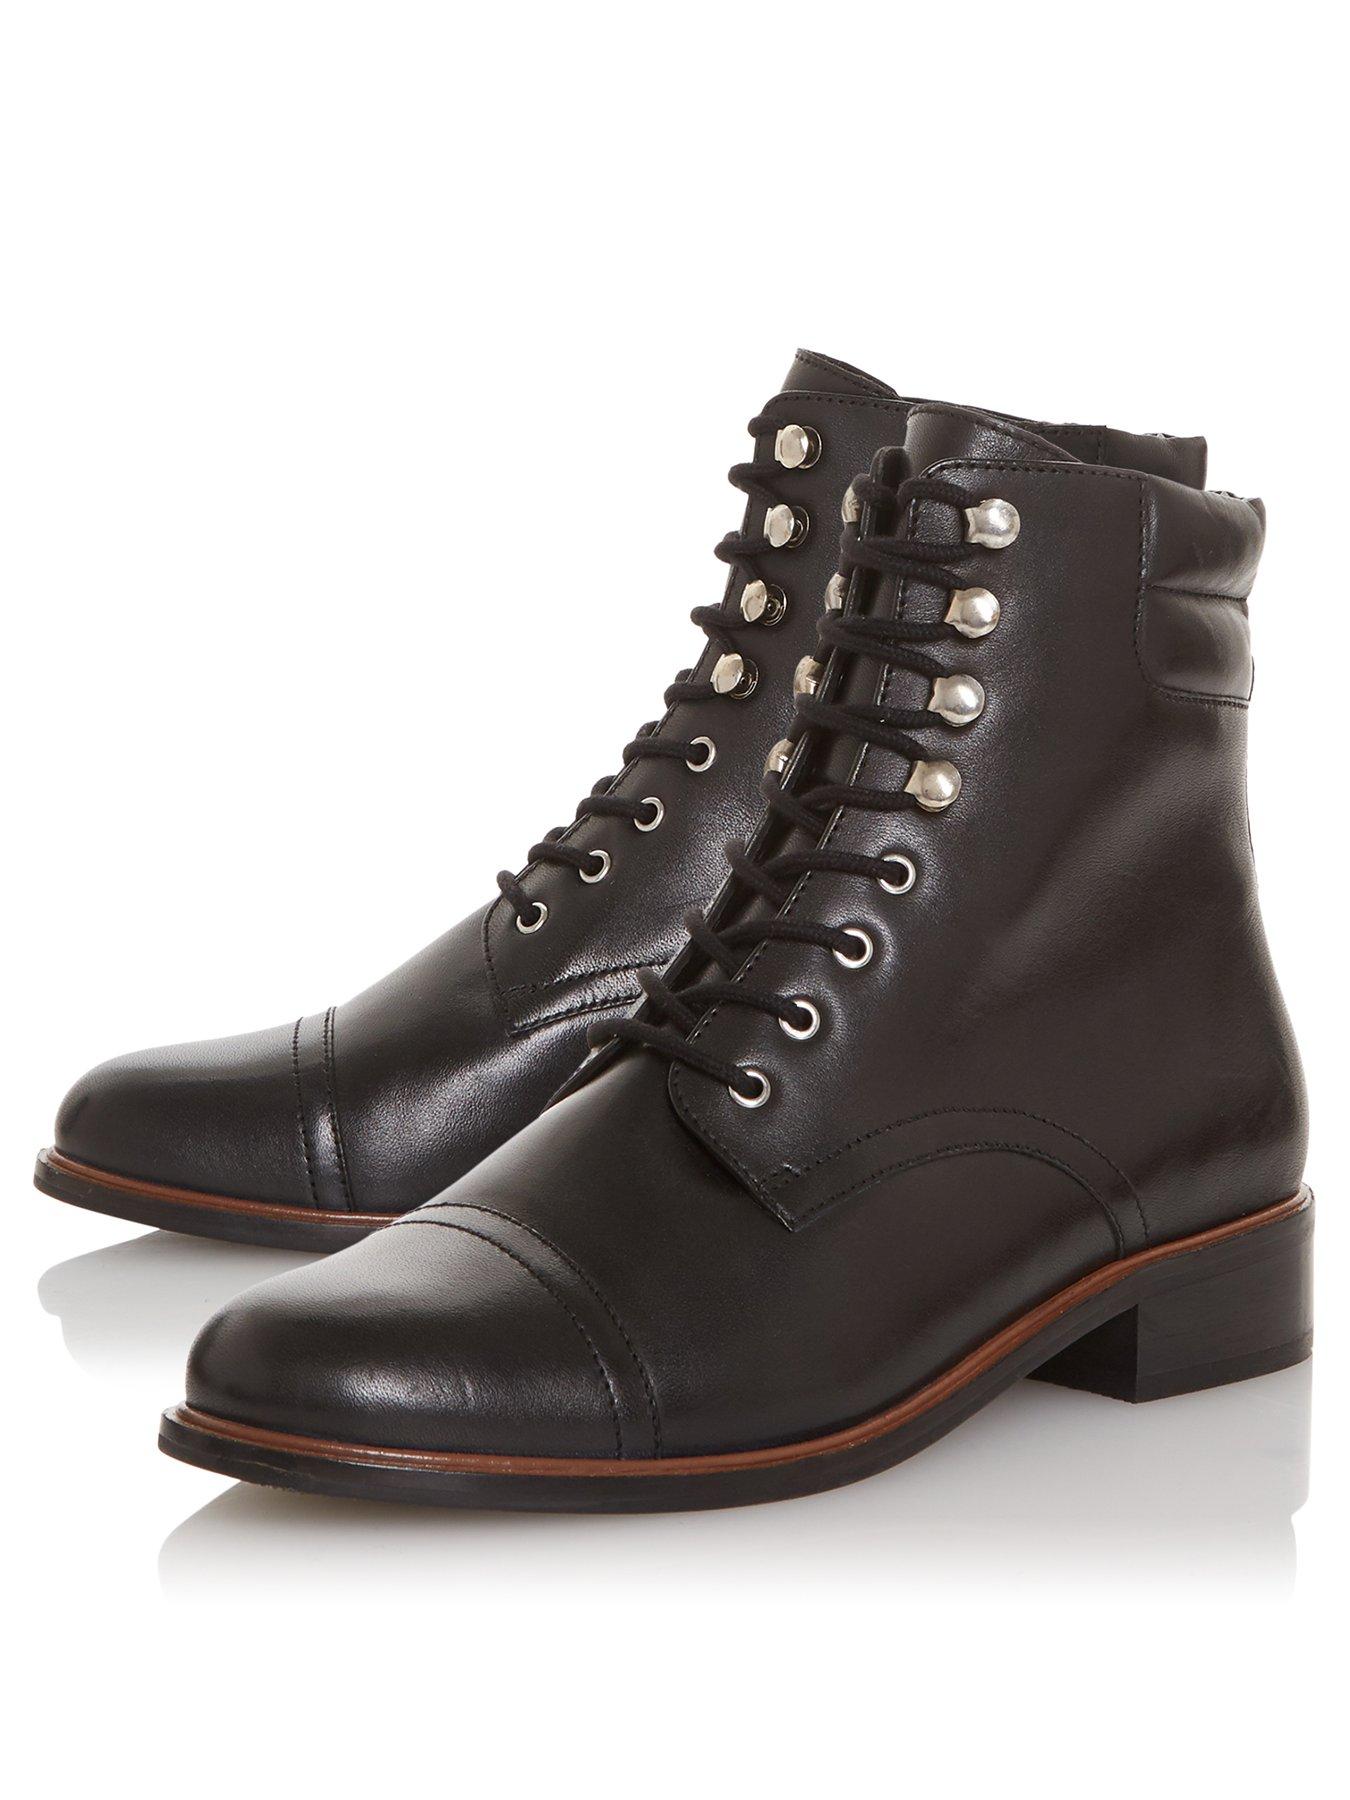 dune ankle boots uk